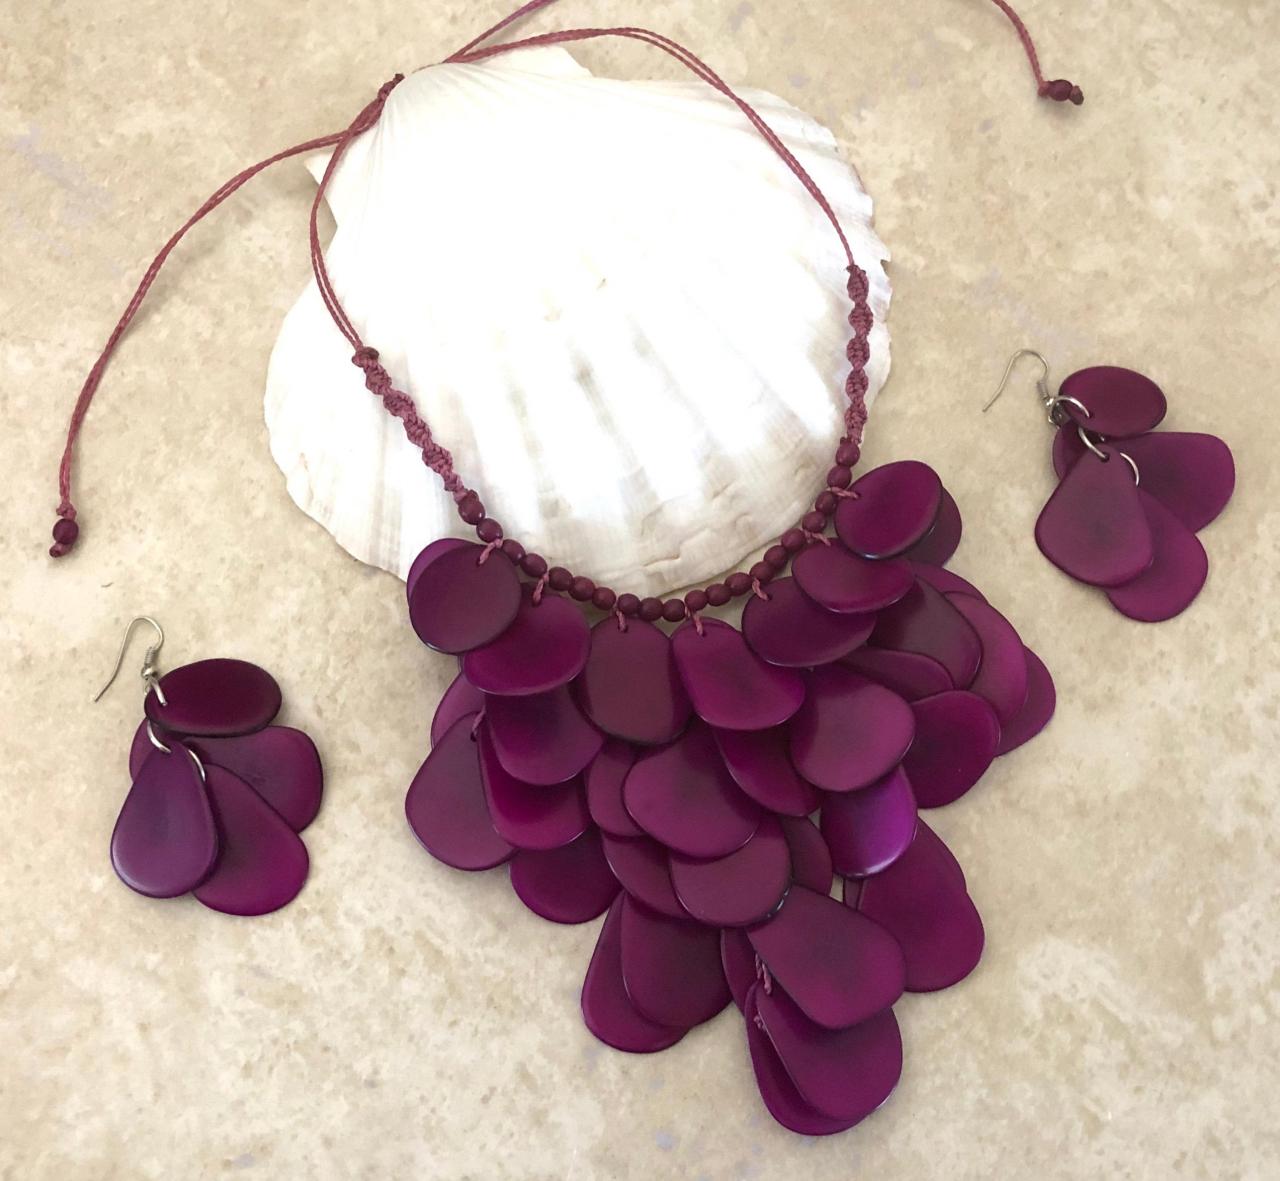 New! Plum Tagua Nut Statement Necklace and Earrings, Handmade Necklace, Seeds Necklace, Summery Necklace, Ethnic Necklace, Chunky Neck